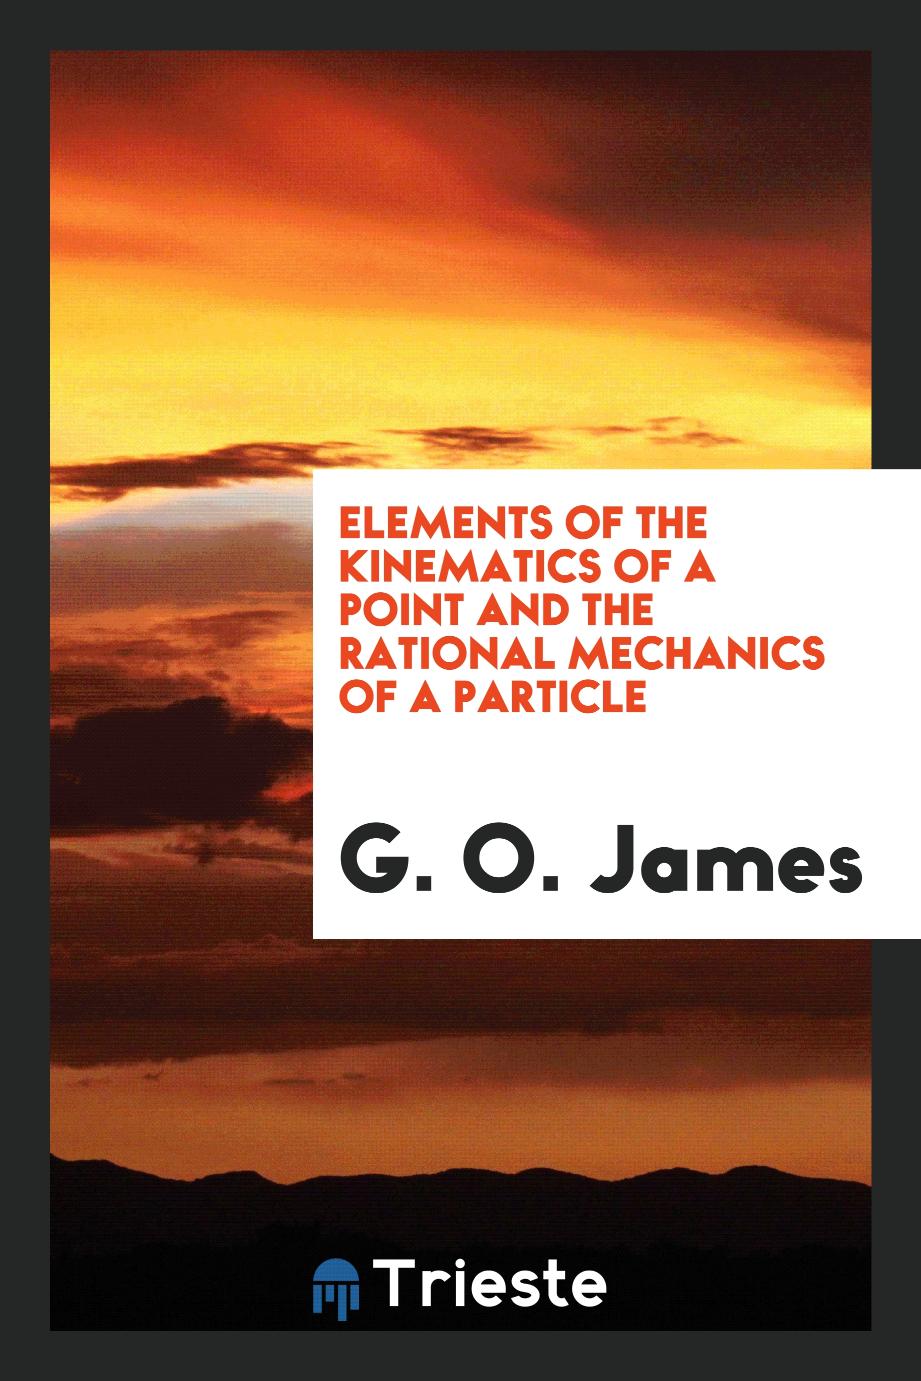 Elements of the kinematics of a point and the rational mechanics of a particle